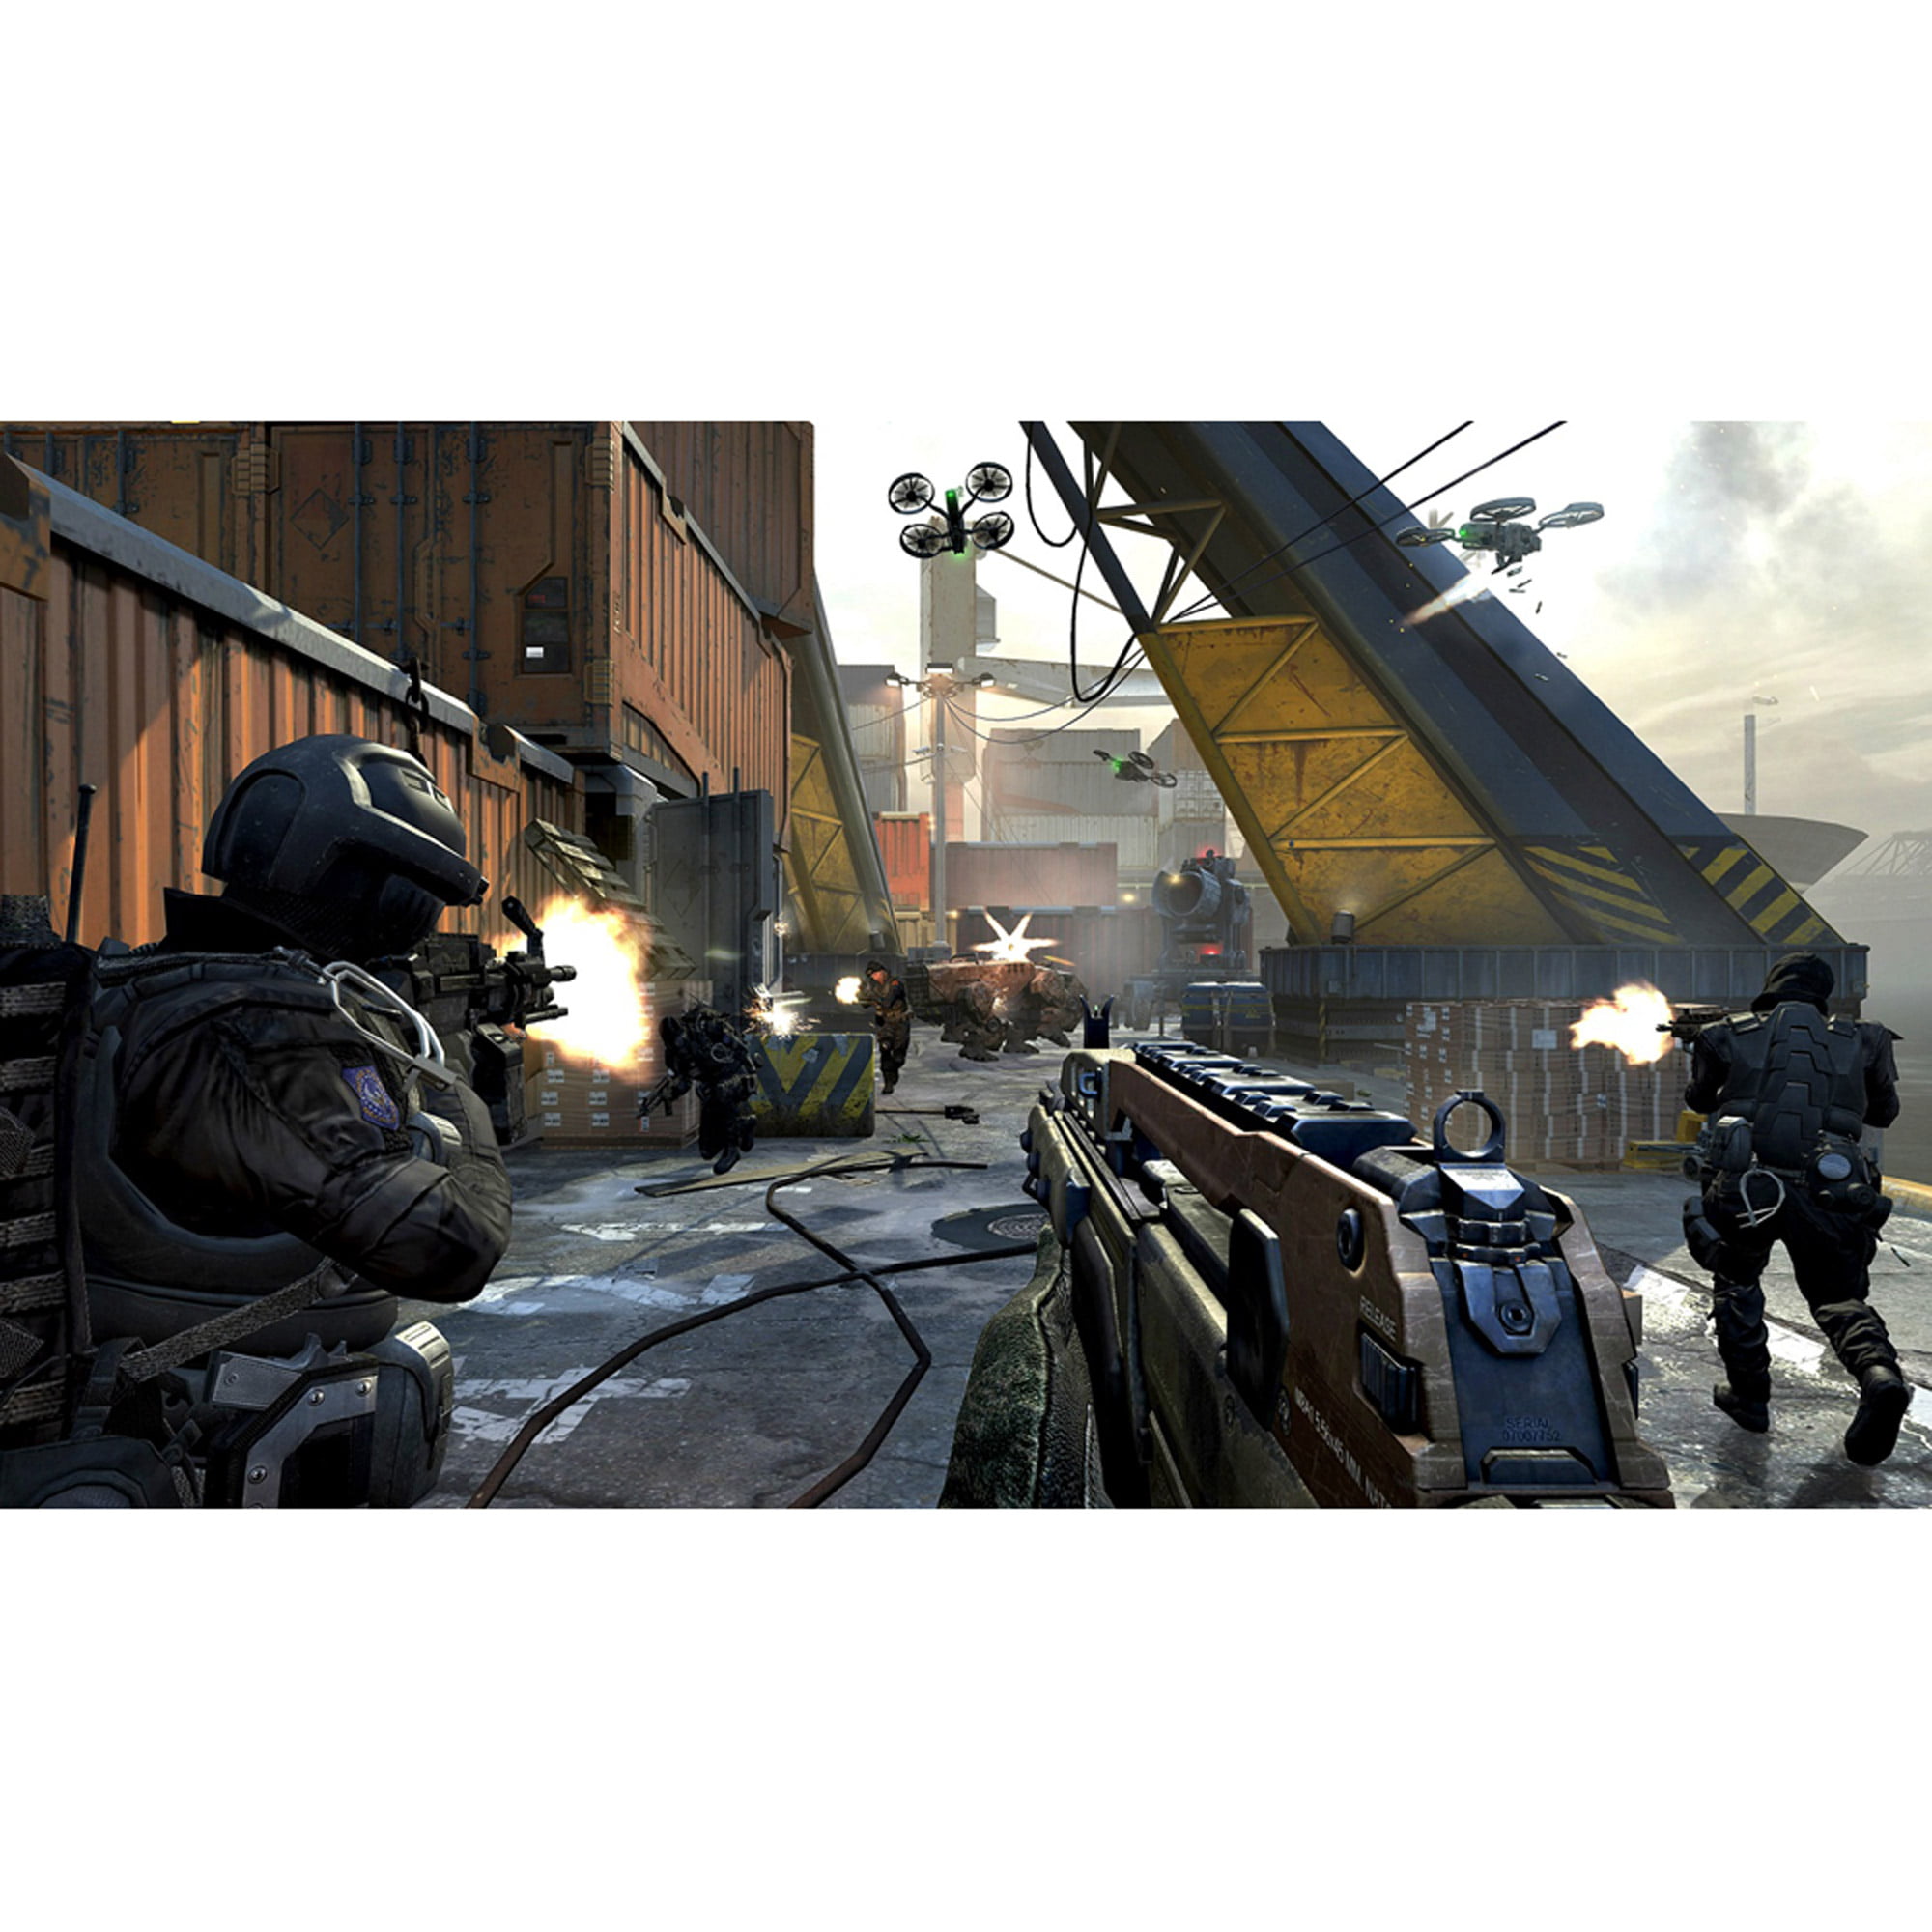  Call of Duty: Black Ops II [Hardened Edition] - Xbox 360 :  Video Games